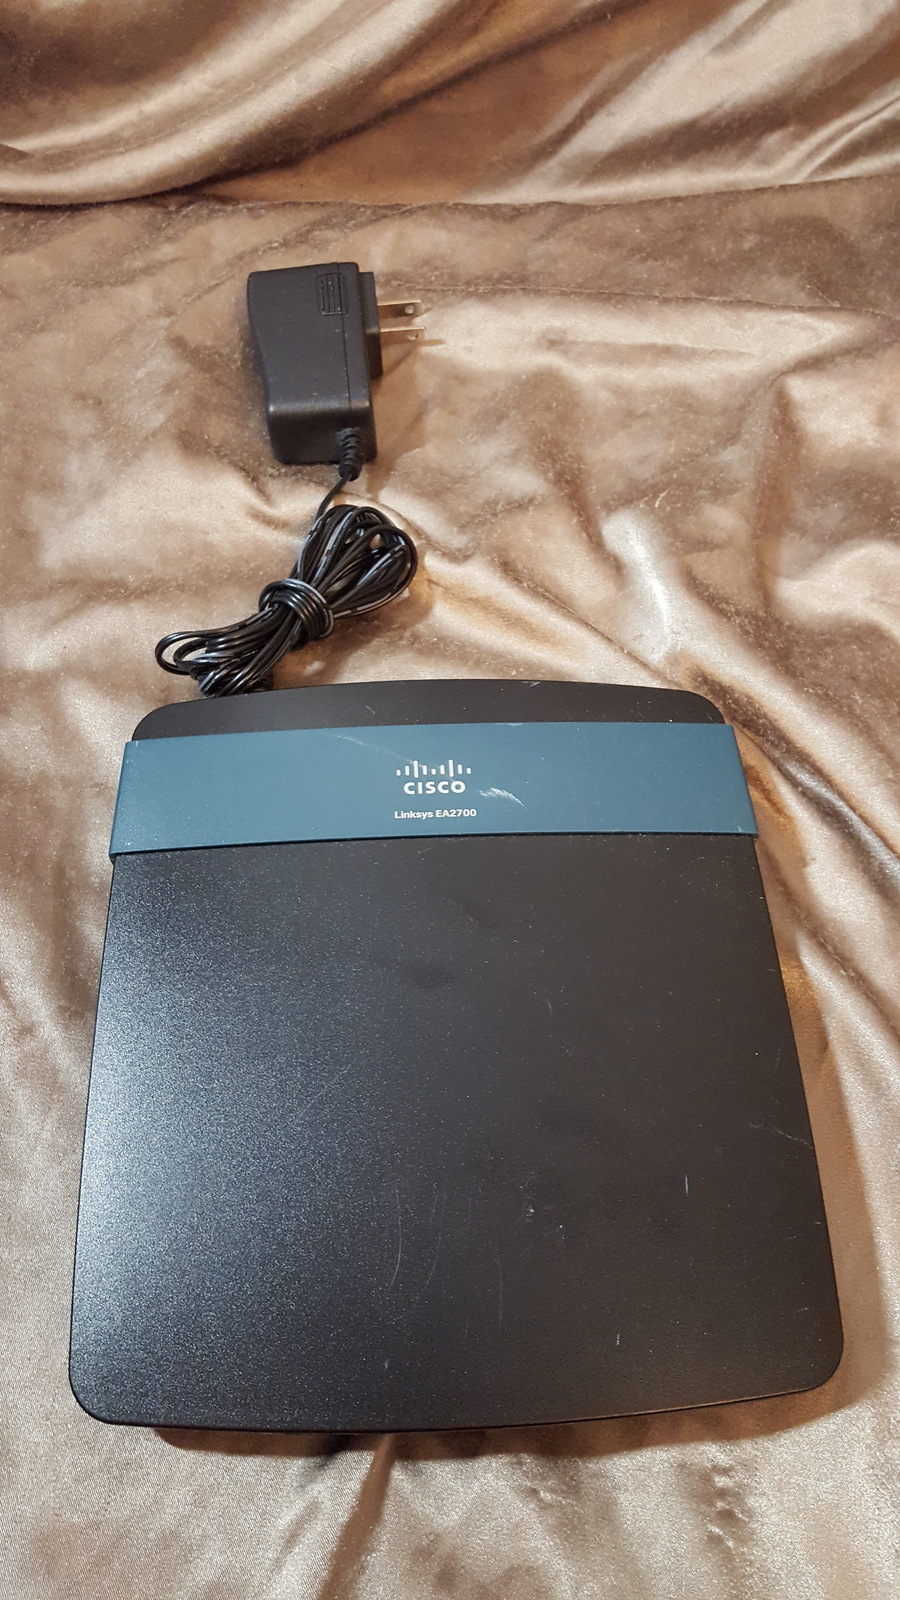 Cisco Linksys ea2700 dual band wireless n router - $14.99